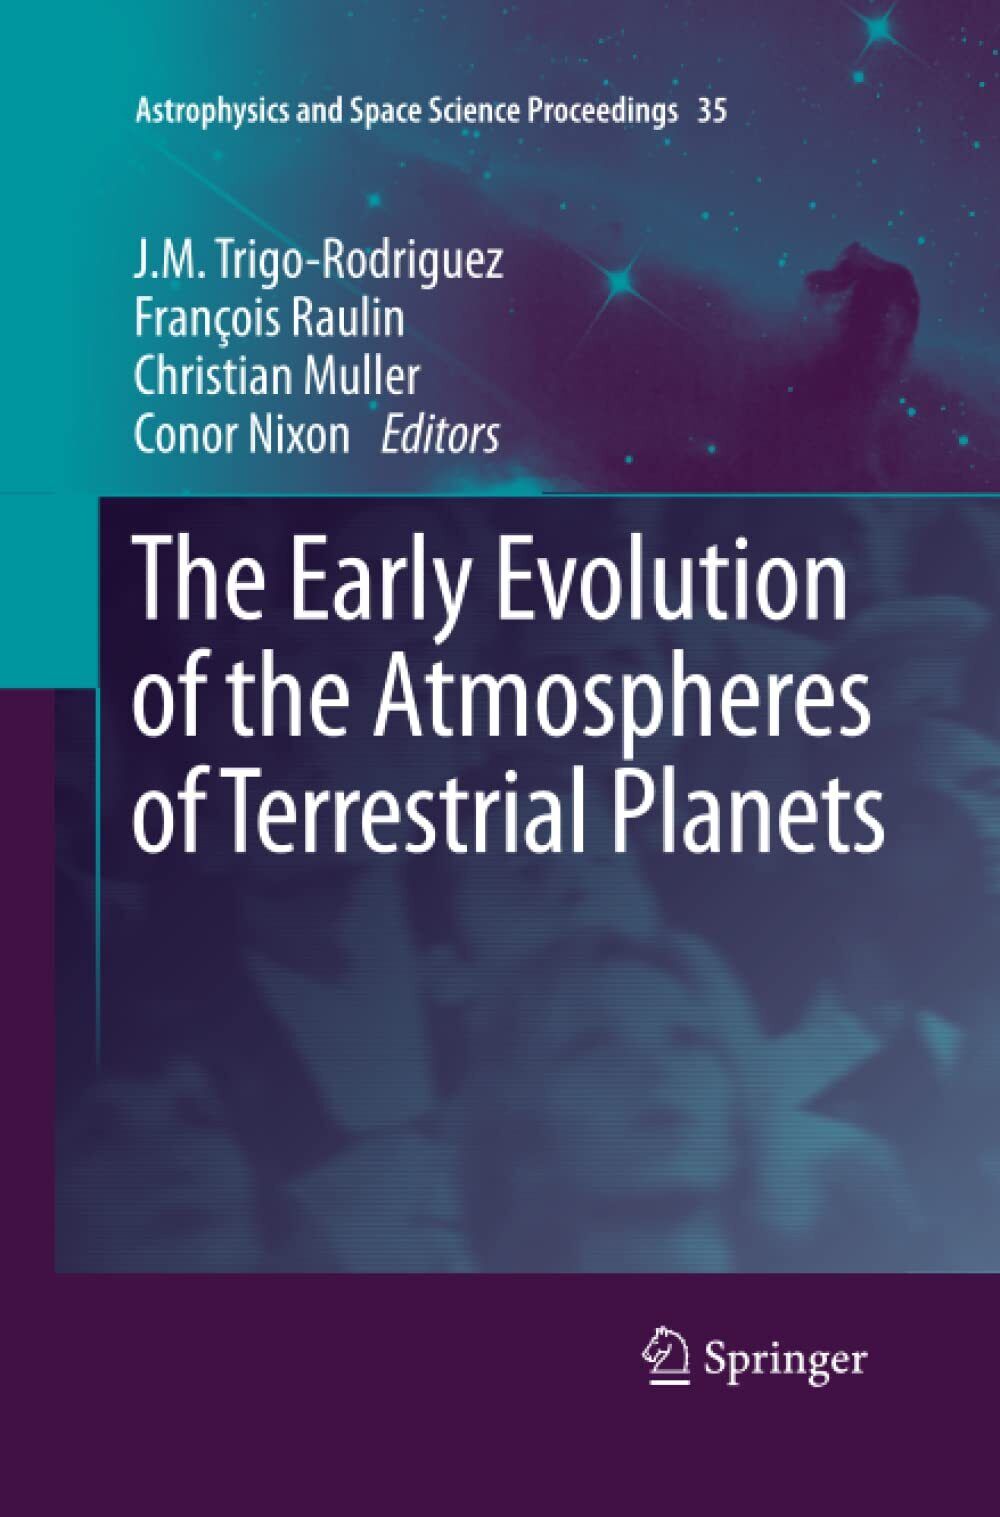 The Early Evolution of the Atmospheres of Terrestrial Planets - Springer, 2015